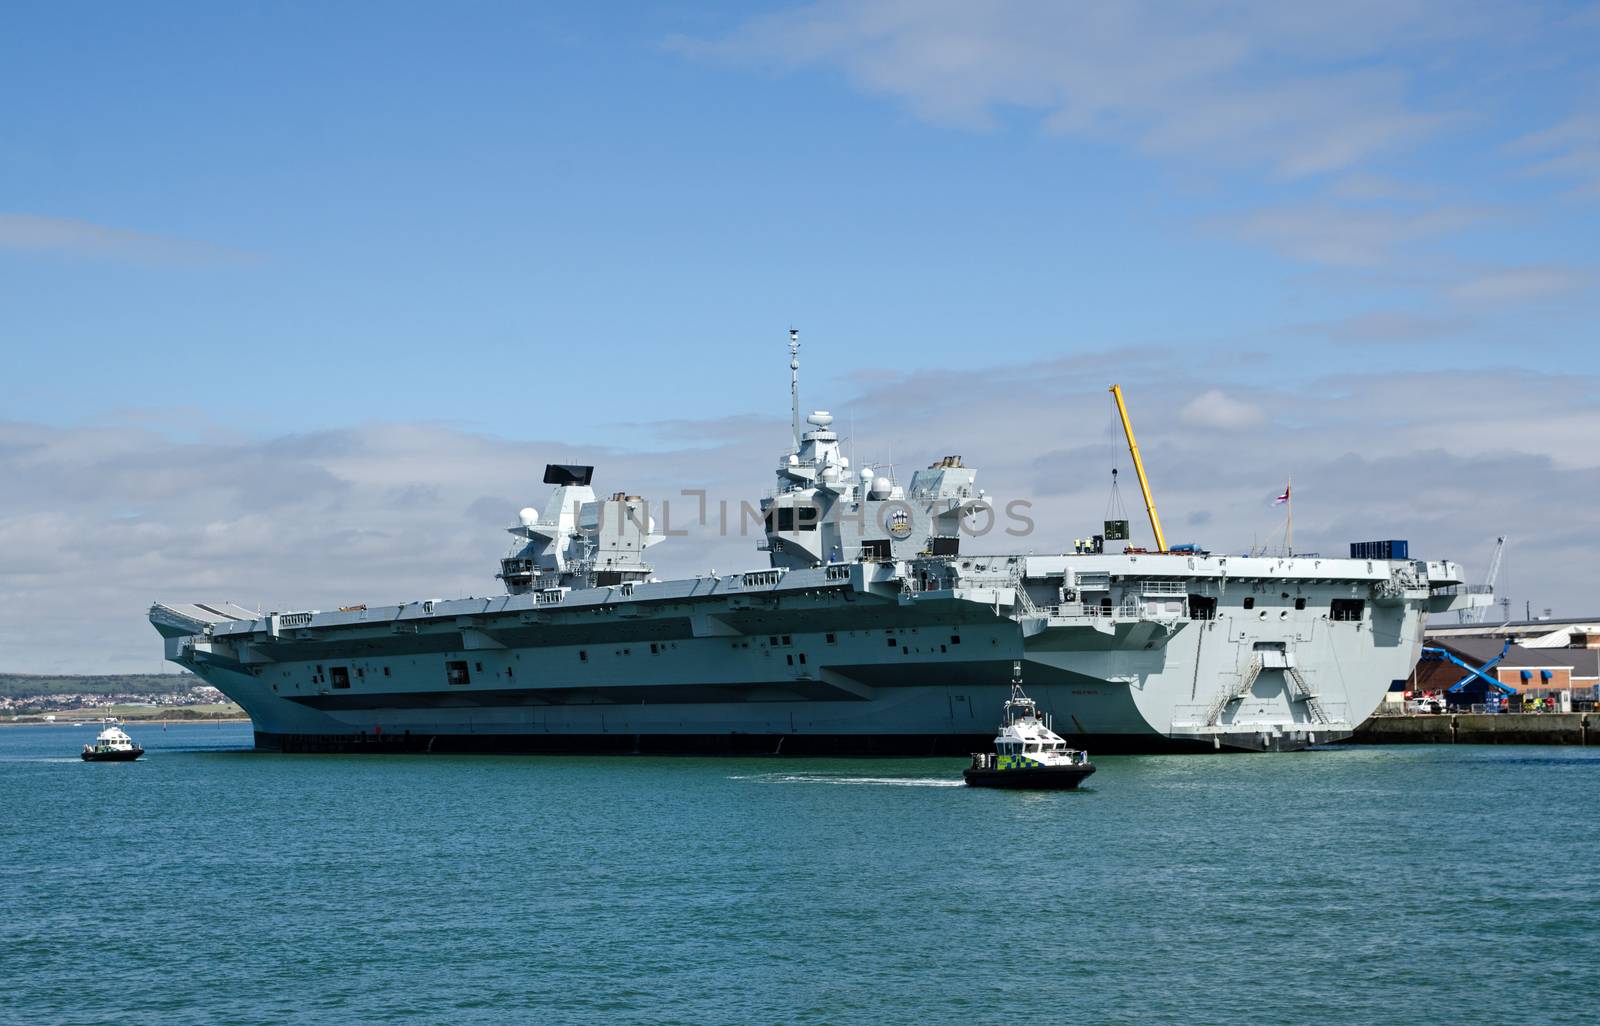 View of the Royal Navy aircraft carrier HMS Prince of Wales being fitted out in Portsmouth Harbour, Hampshire on a sunny day.